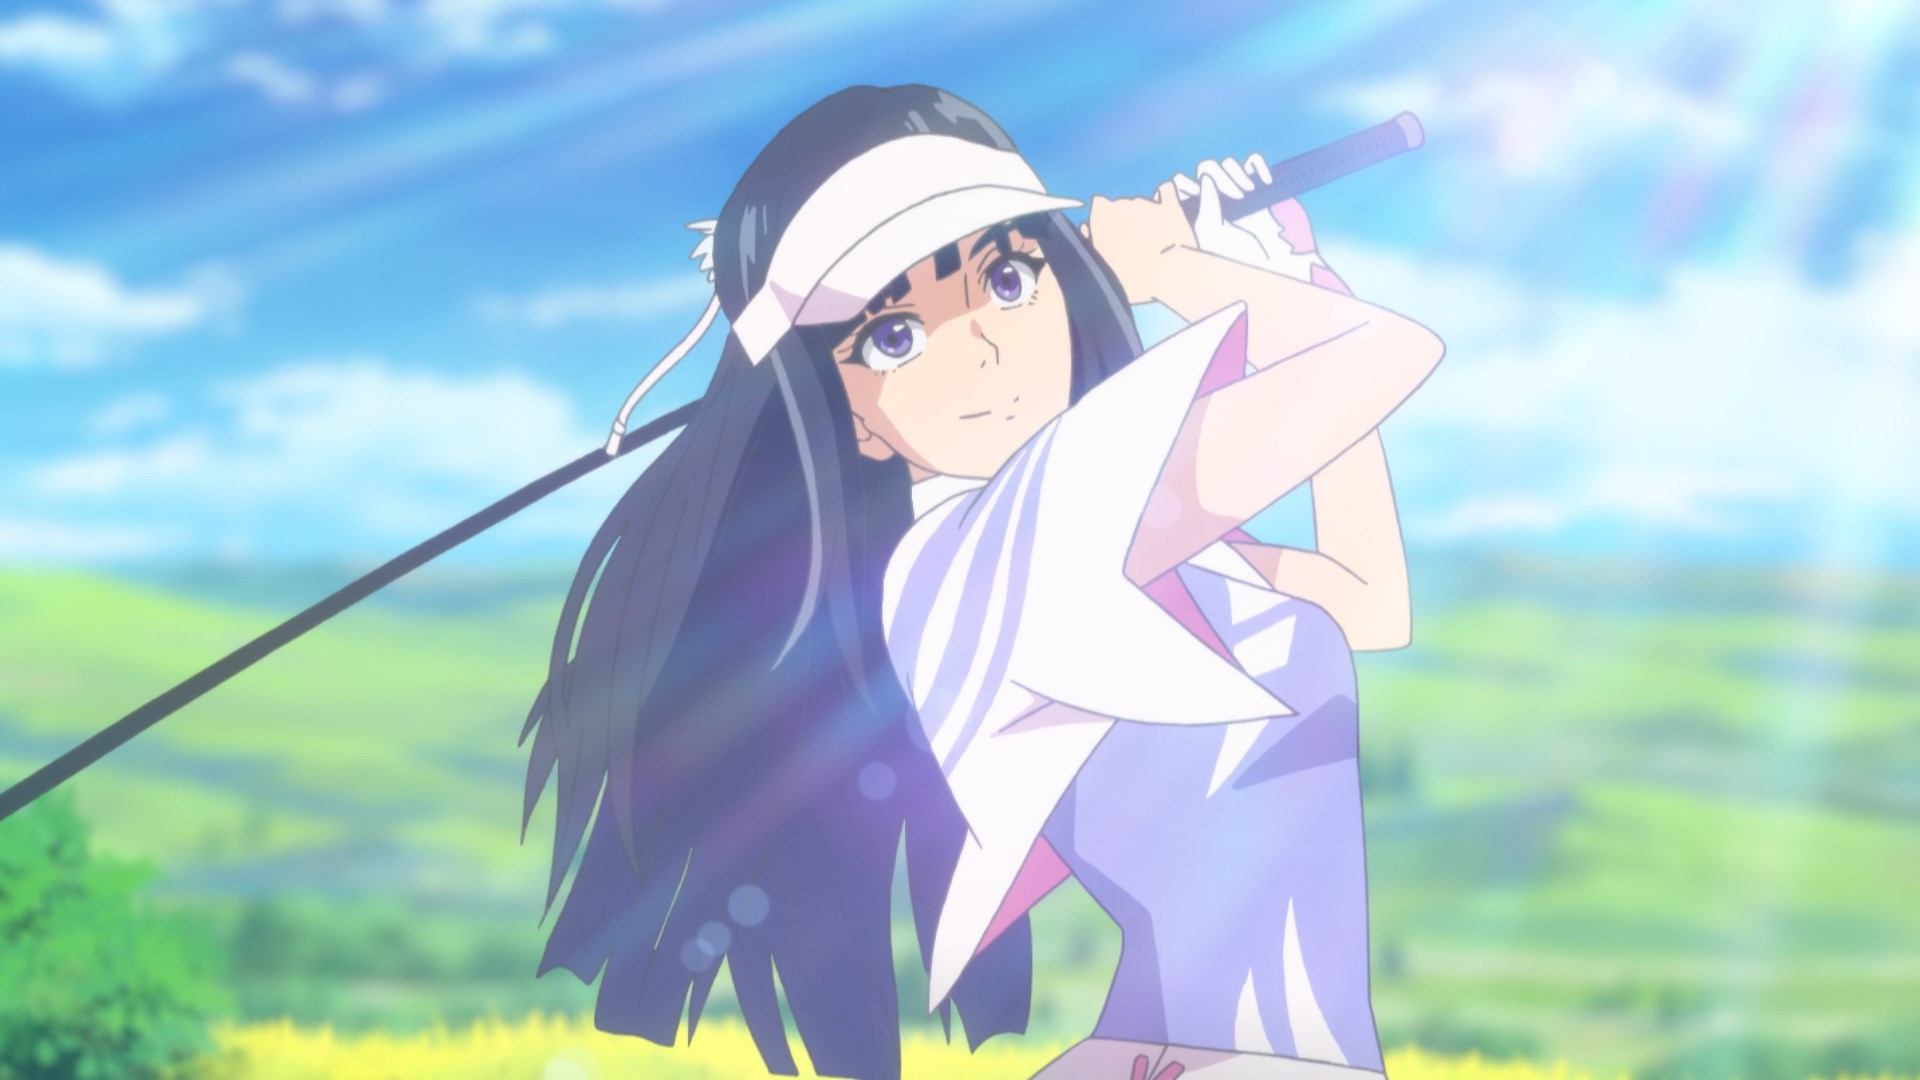 Feez Wing: Golf Girls' Story Definitely Lives Up To Its Reputation In How No Holds Barred It Is. It Makes Golf Super Exciting. Loved All The Sunrise Bandai Cameos And References Gundam Gunpla